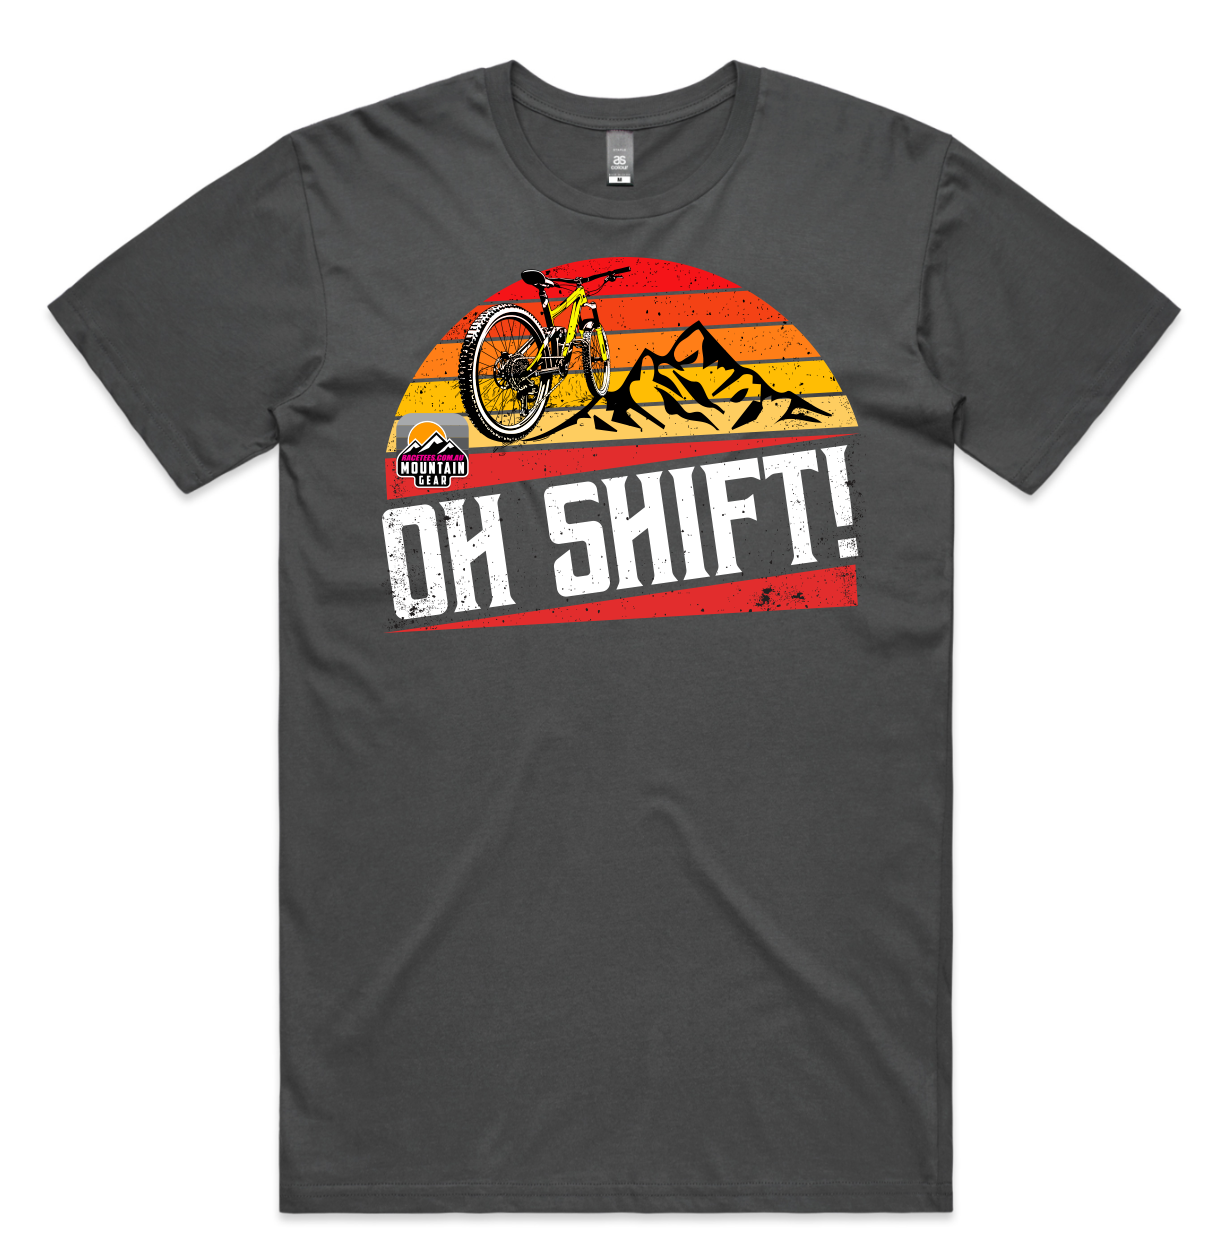 Mountain Collection "Oh Shift" - Mens